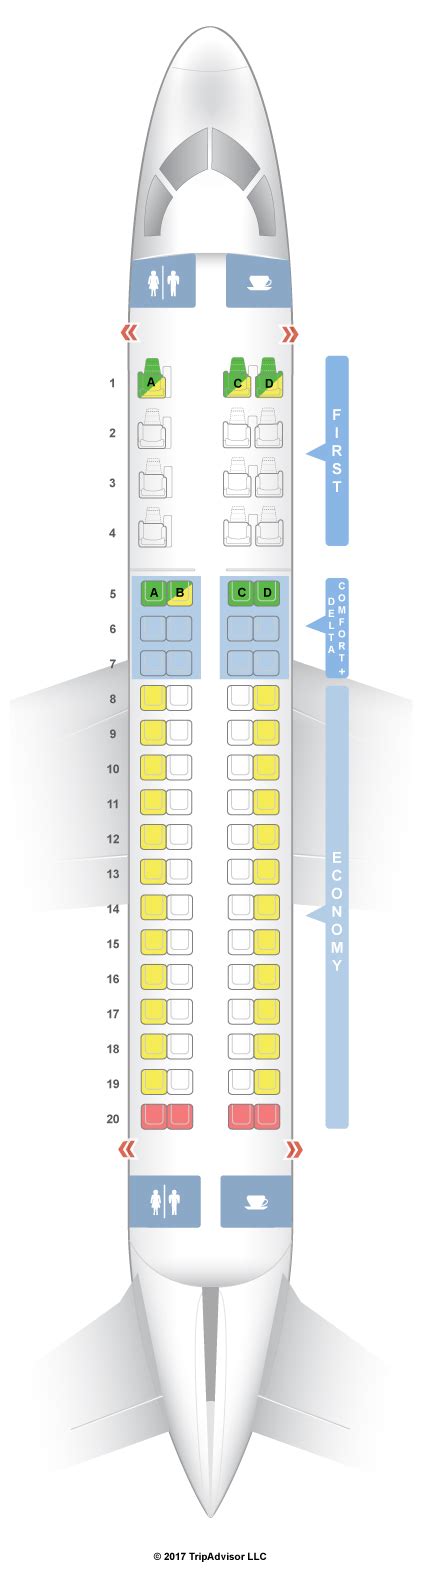 Detailed seat map KLM Embraer E195 E2. Find the best airplanes seats, information on legroom, recline and in-flight entertainment using our detailed online seating charts. ... Embraer 175; Embraer 190; Embraer E195 E2; View all. Recent Travel Tips. Hotel Panviman Koh Phangan - A treasure on a beautiful crescent moon beach. ... Delta Airlines ...